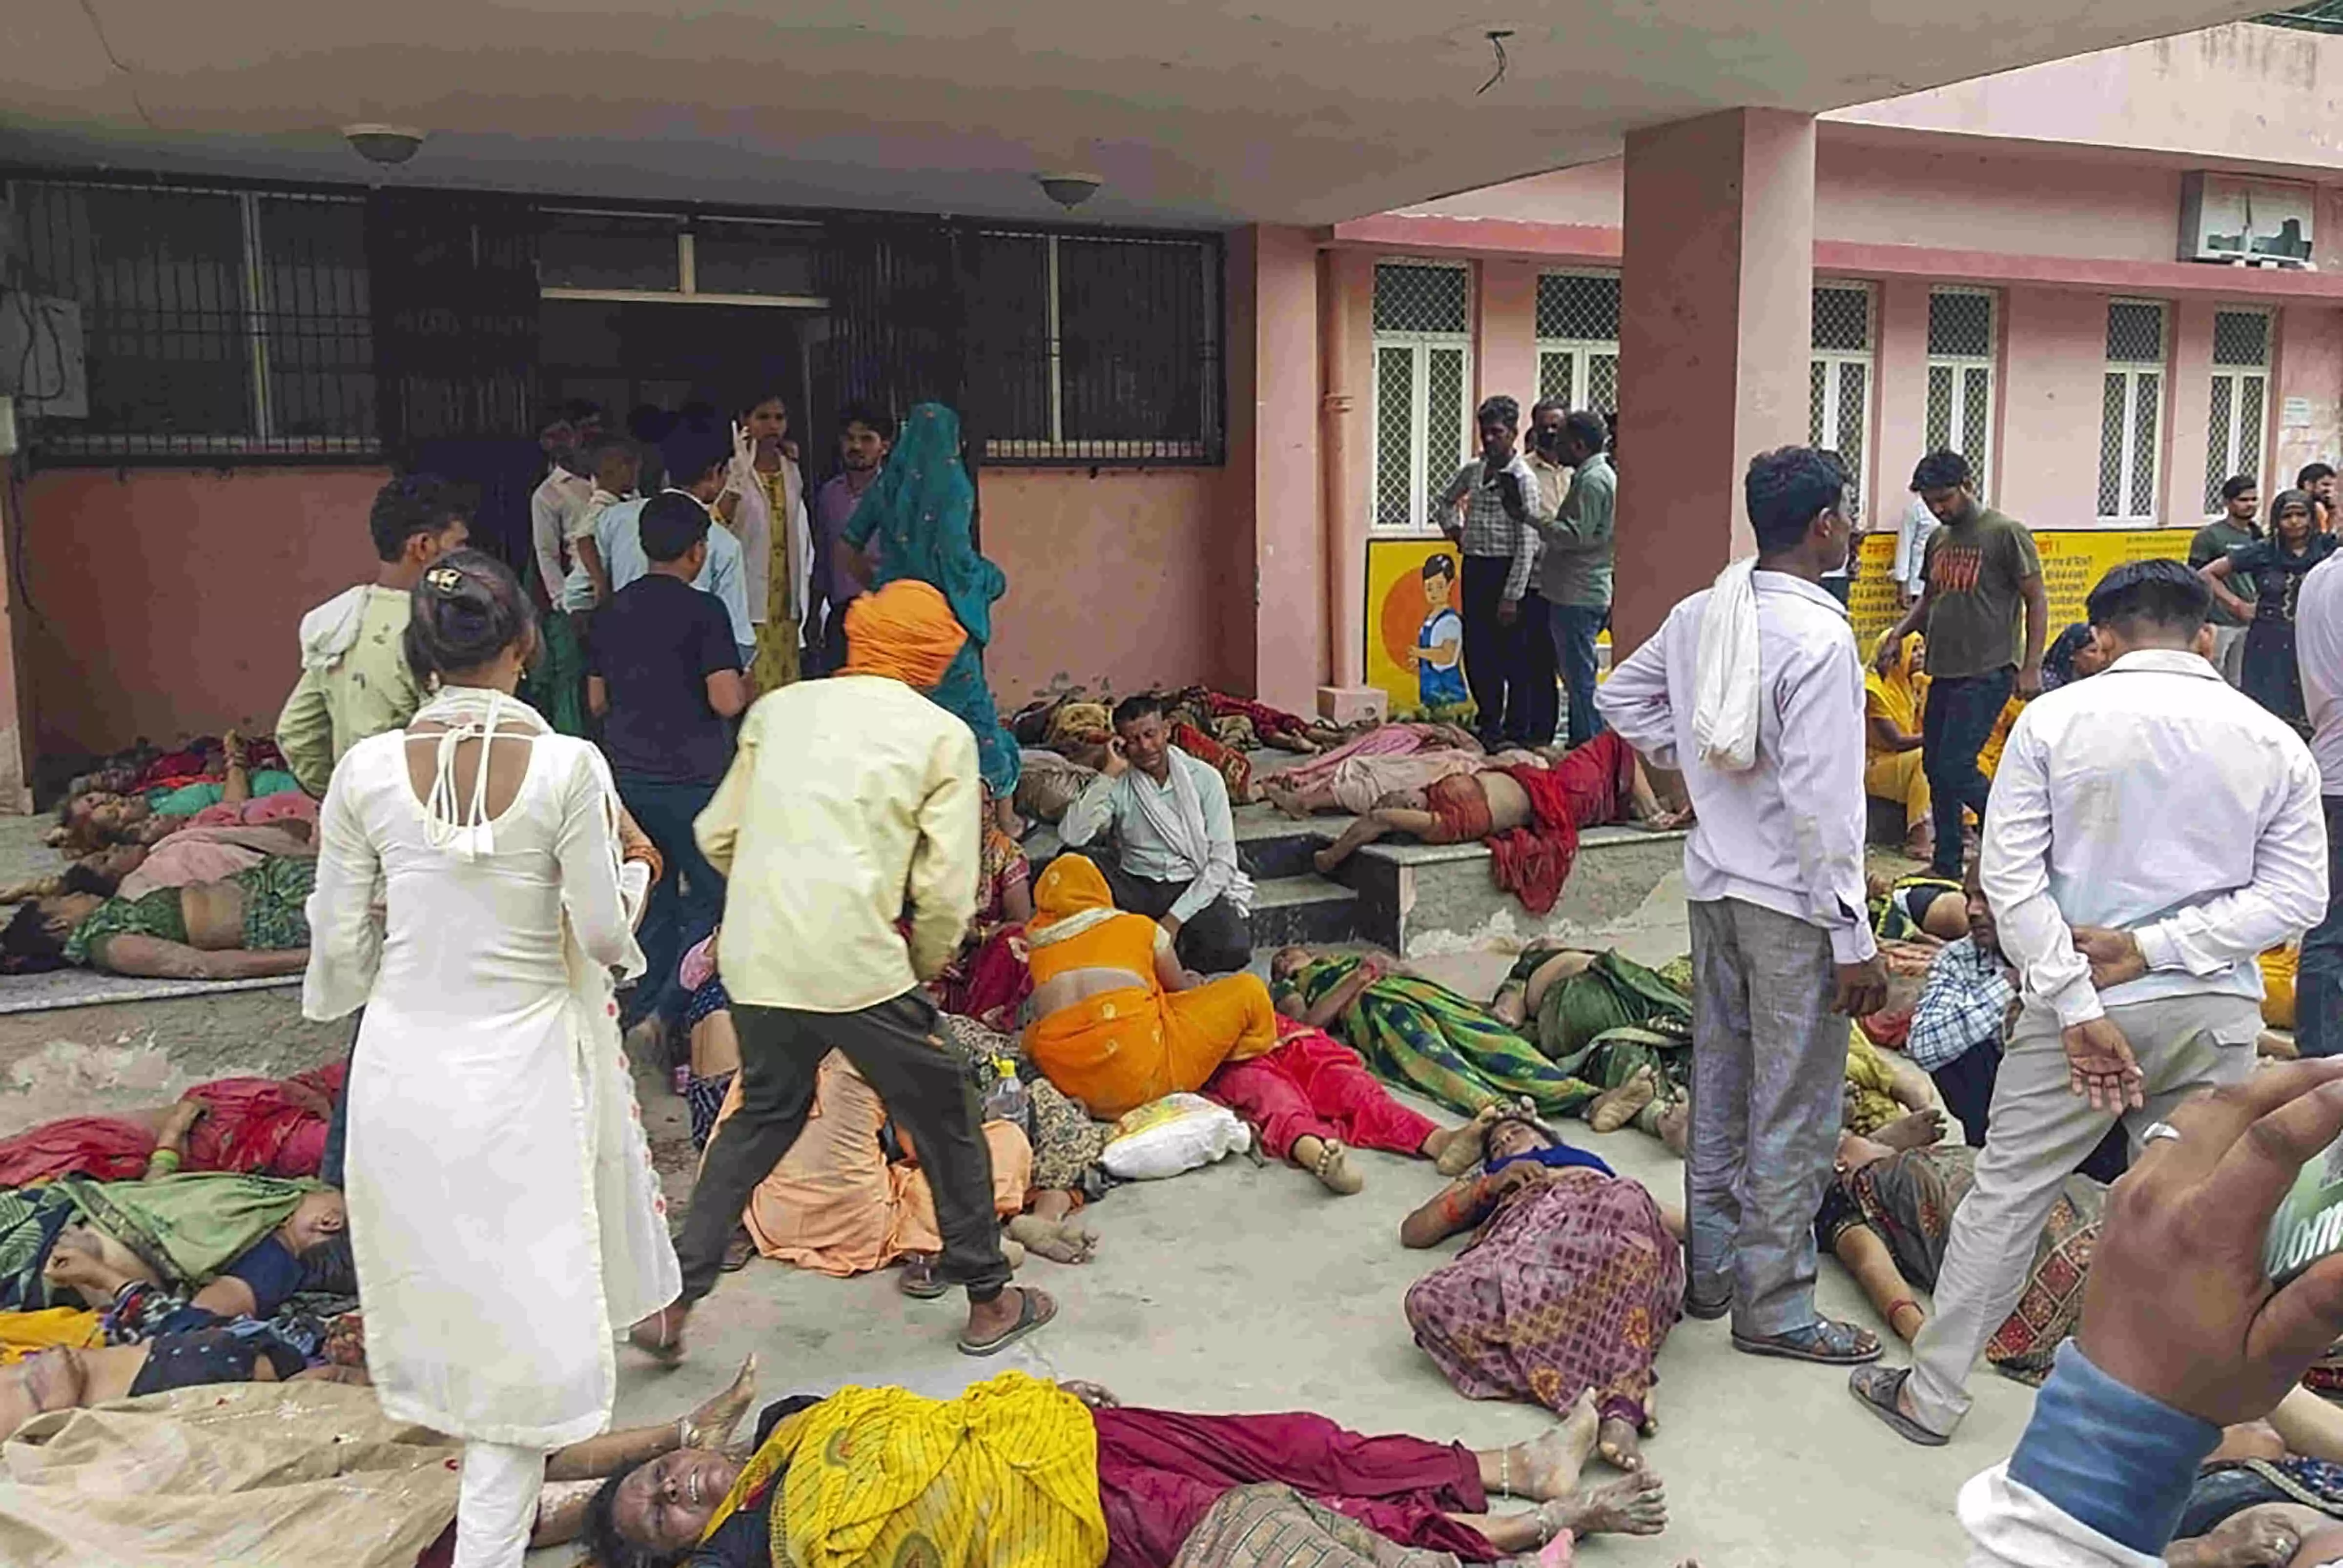 Hathras stampede: Outside hospital, bodies of victims lay on the floor, loud wails pierce the air